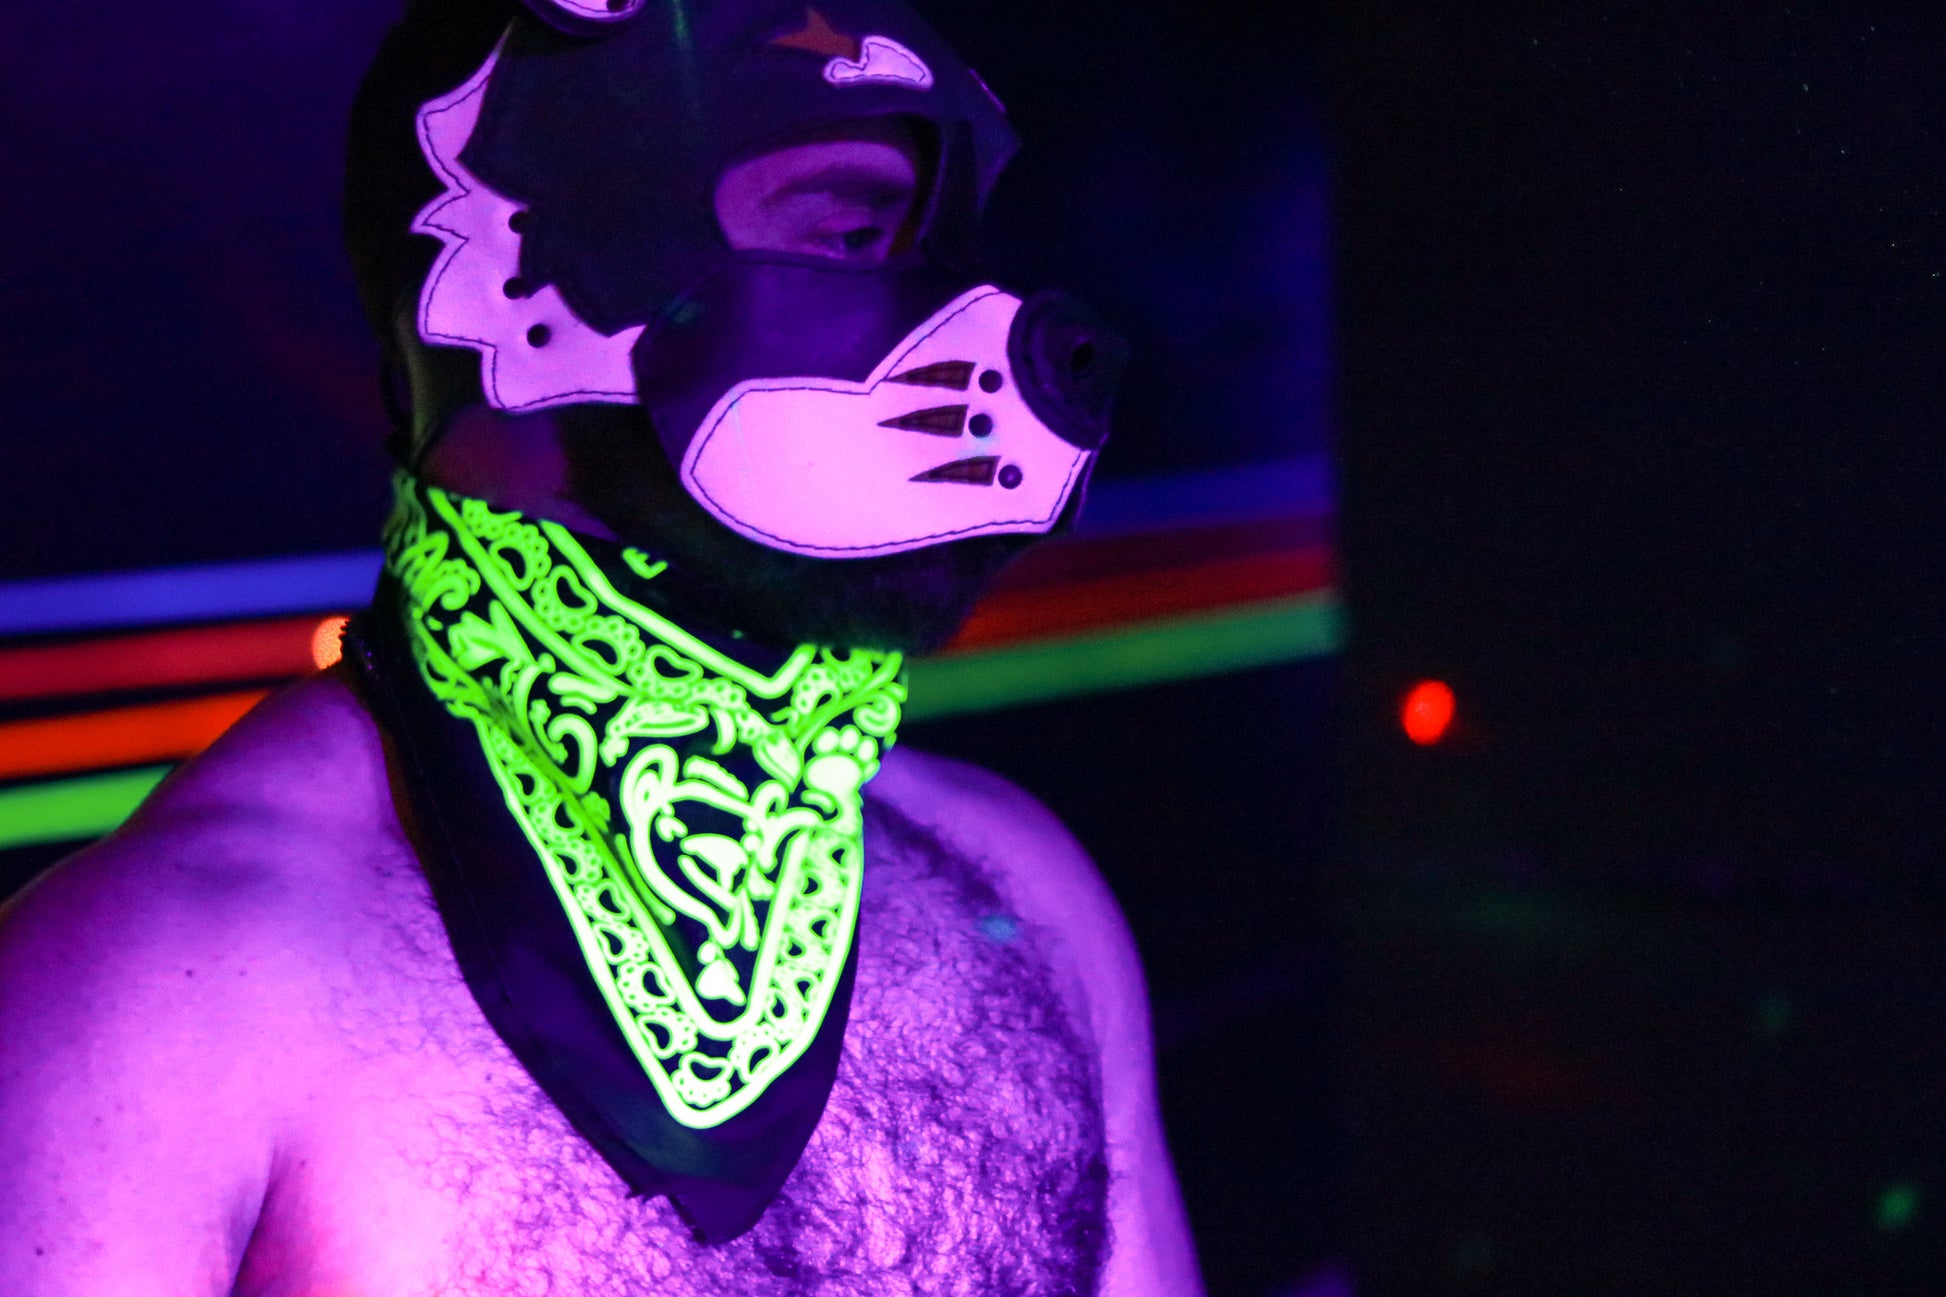 Shirtless male model in green leather dog hood wearing neon green animal bandana, lit by blacklight and club lighting. 